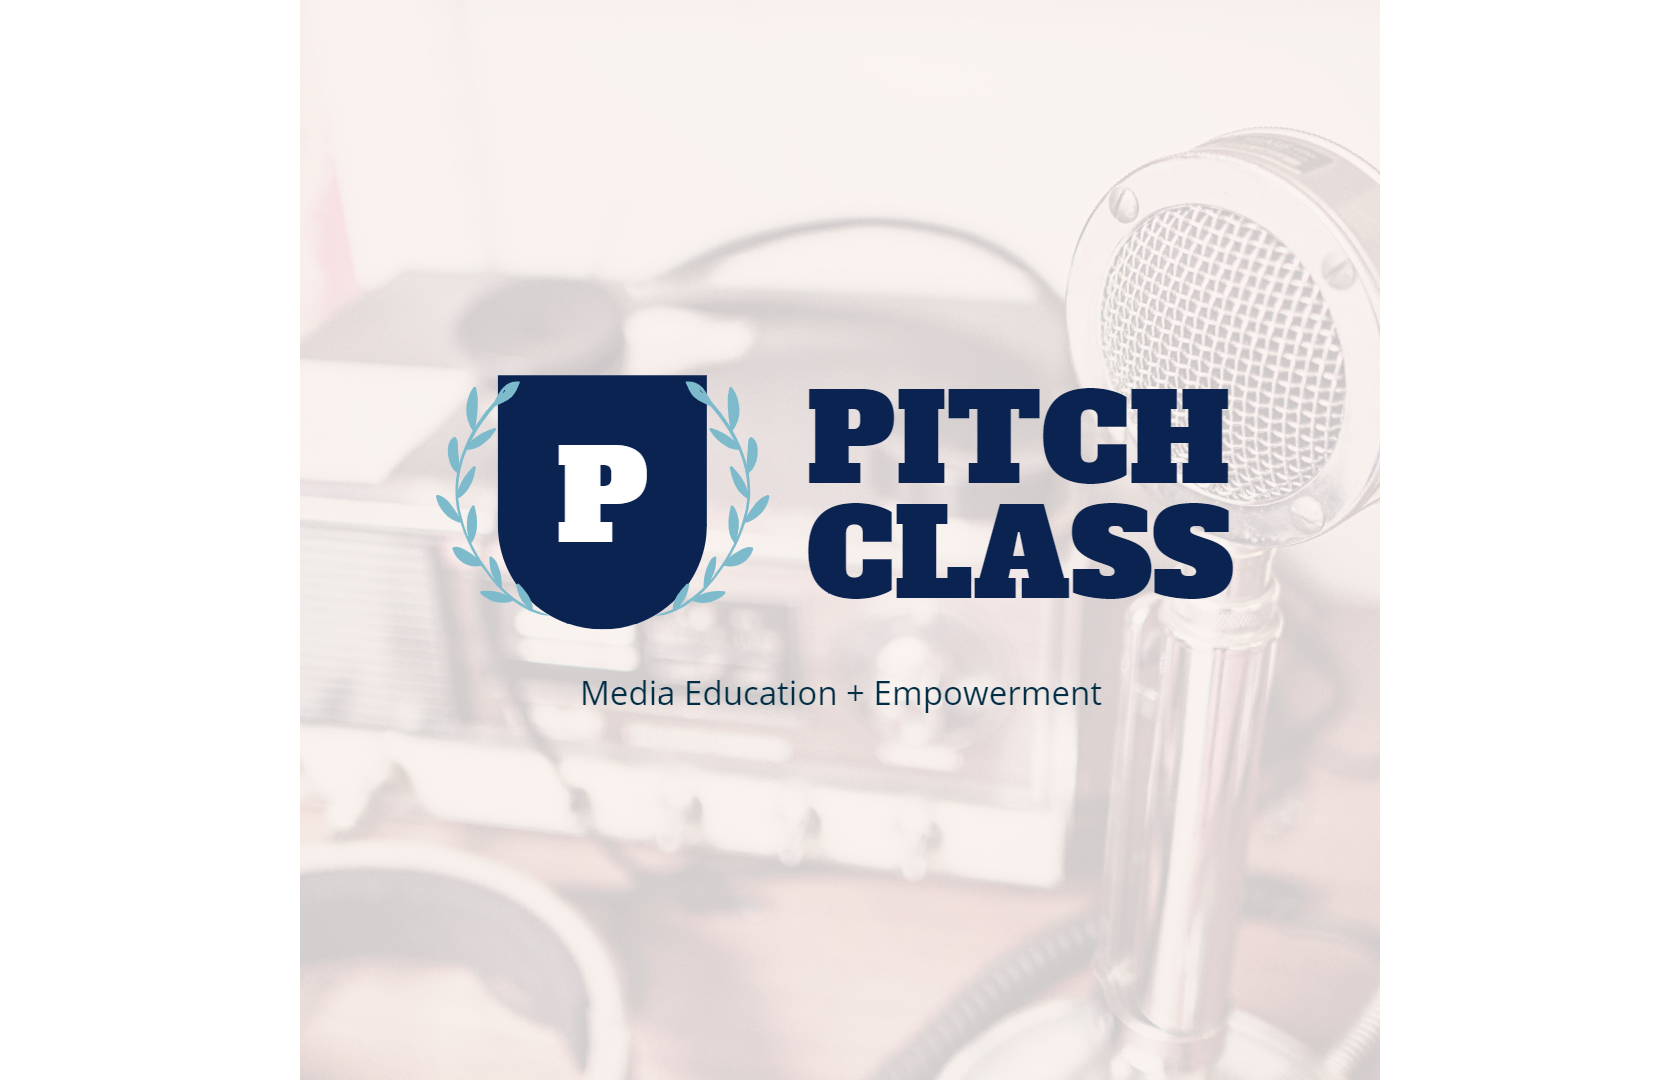 Find Your Voice in the Media - Pitch Class™